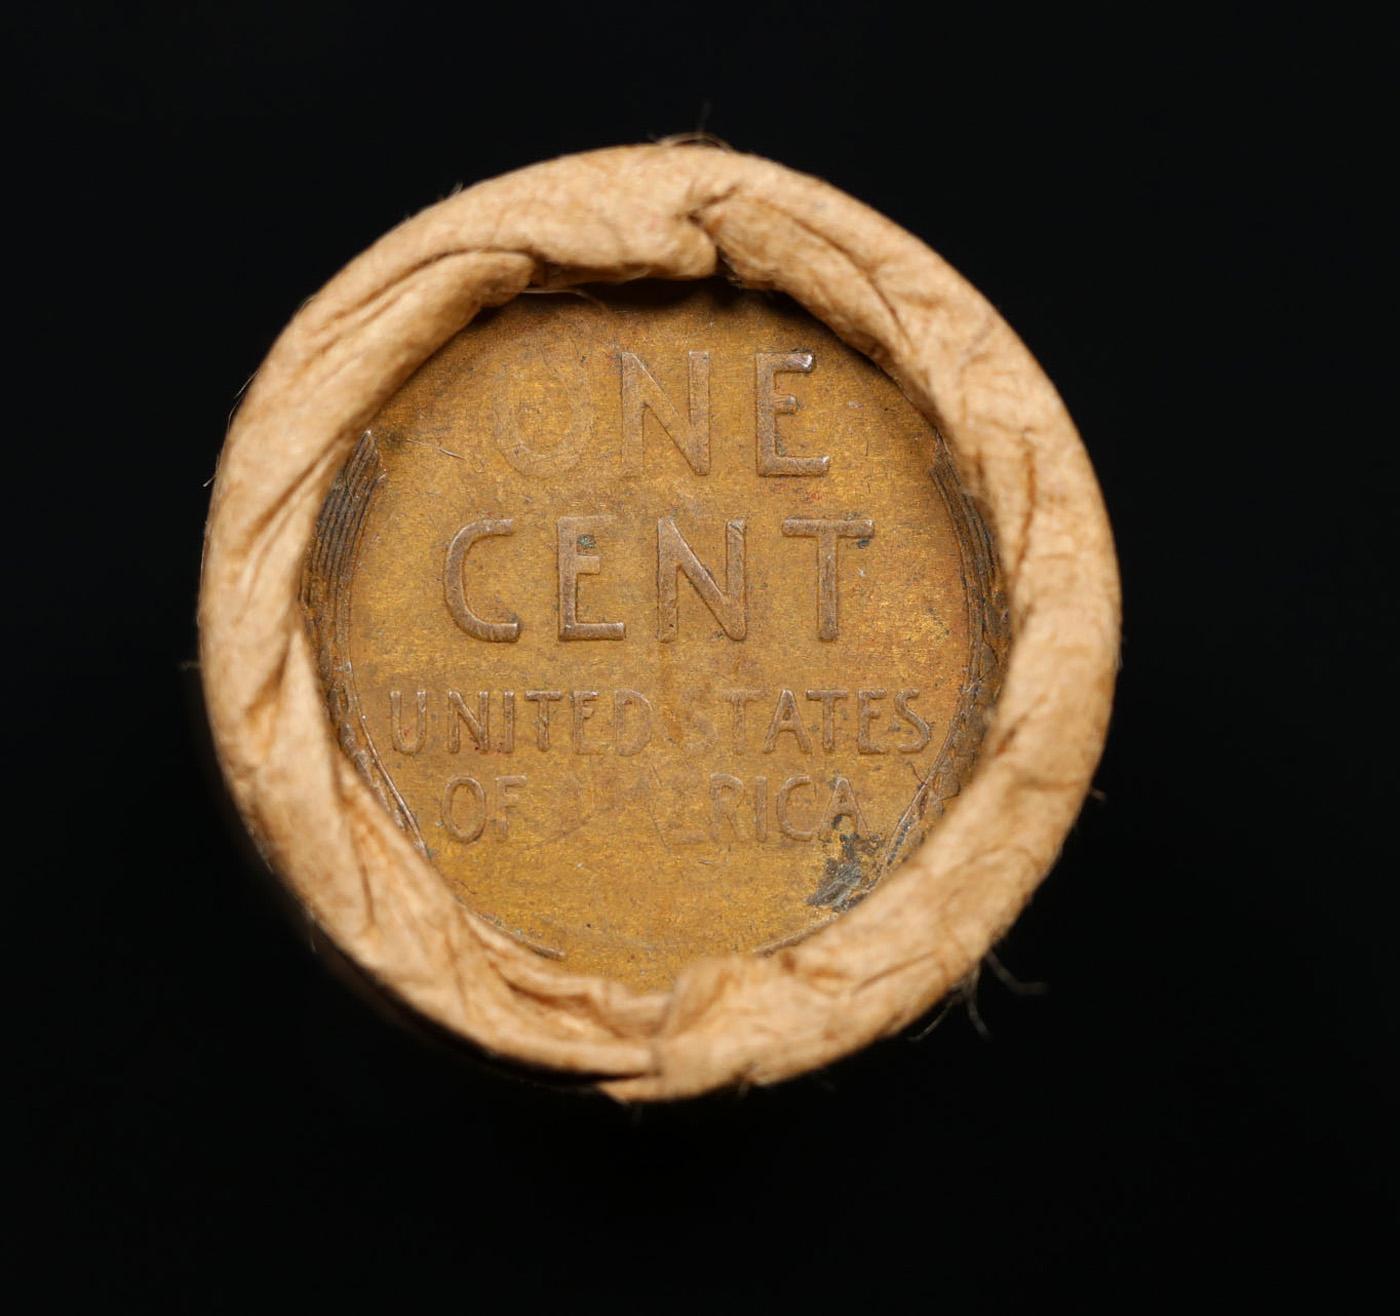 Lincoln Wheat Cent 1c Mixed Roll Orig Brandt McDonalds Wrapper, 1928-d end, Wheat other end